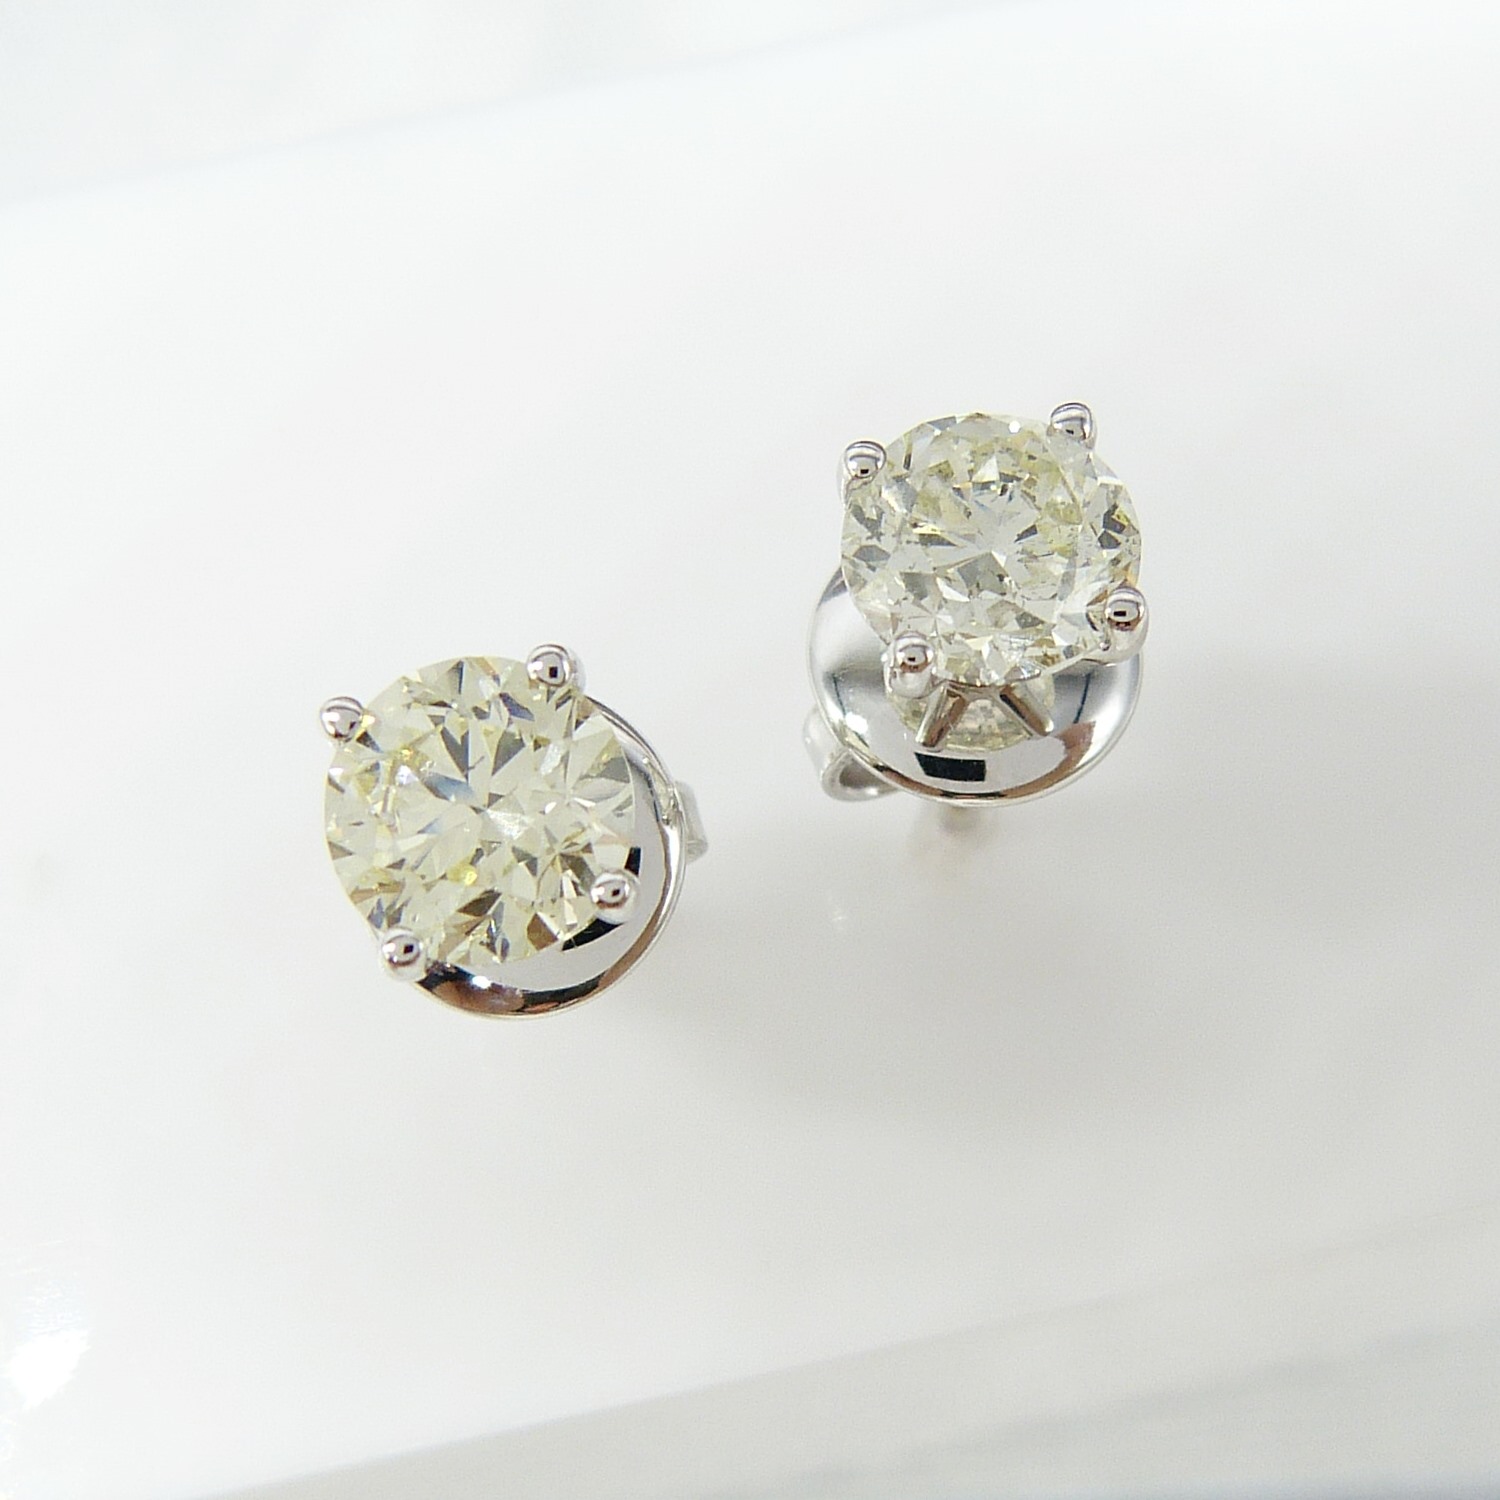 1.32 Carat Diamond Stud Earrings In 18ct White Gold, Certificated and Boxed - Image 5 of 8